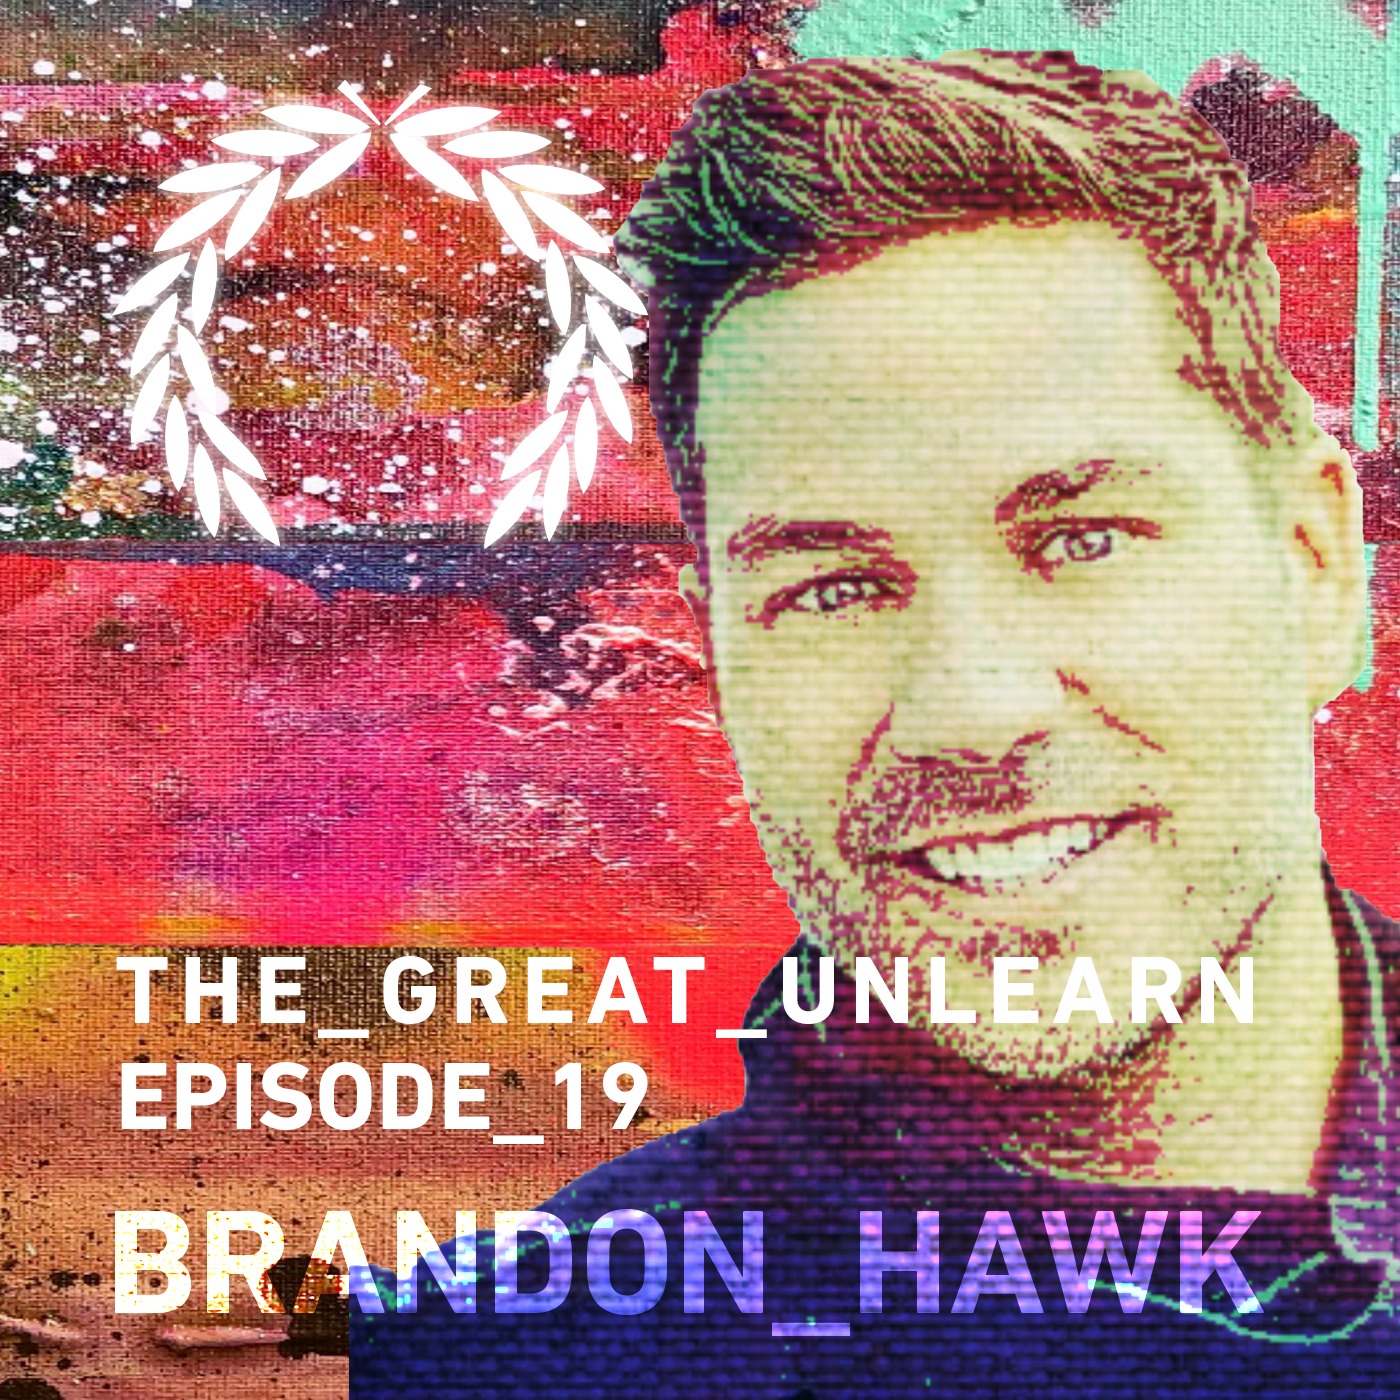 Brandon Hawk | Losing Wimbledon, Running to Religion & How to Deal with Emotional Pain